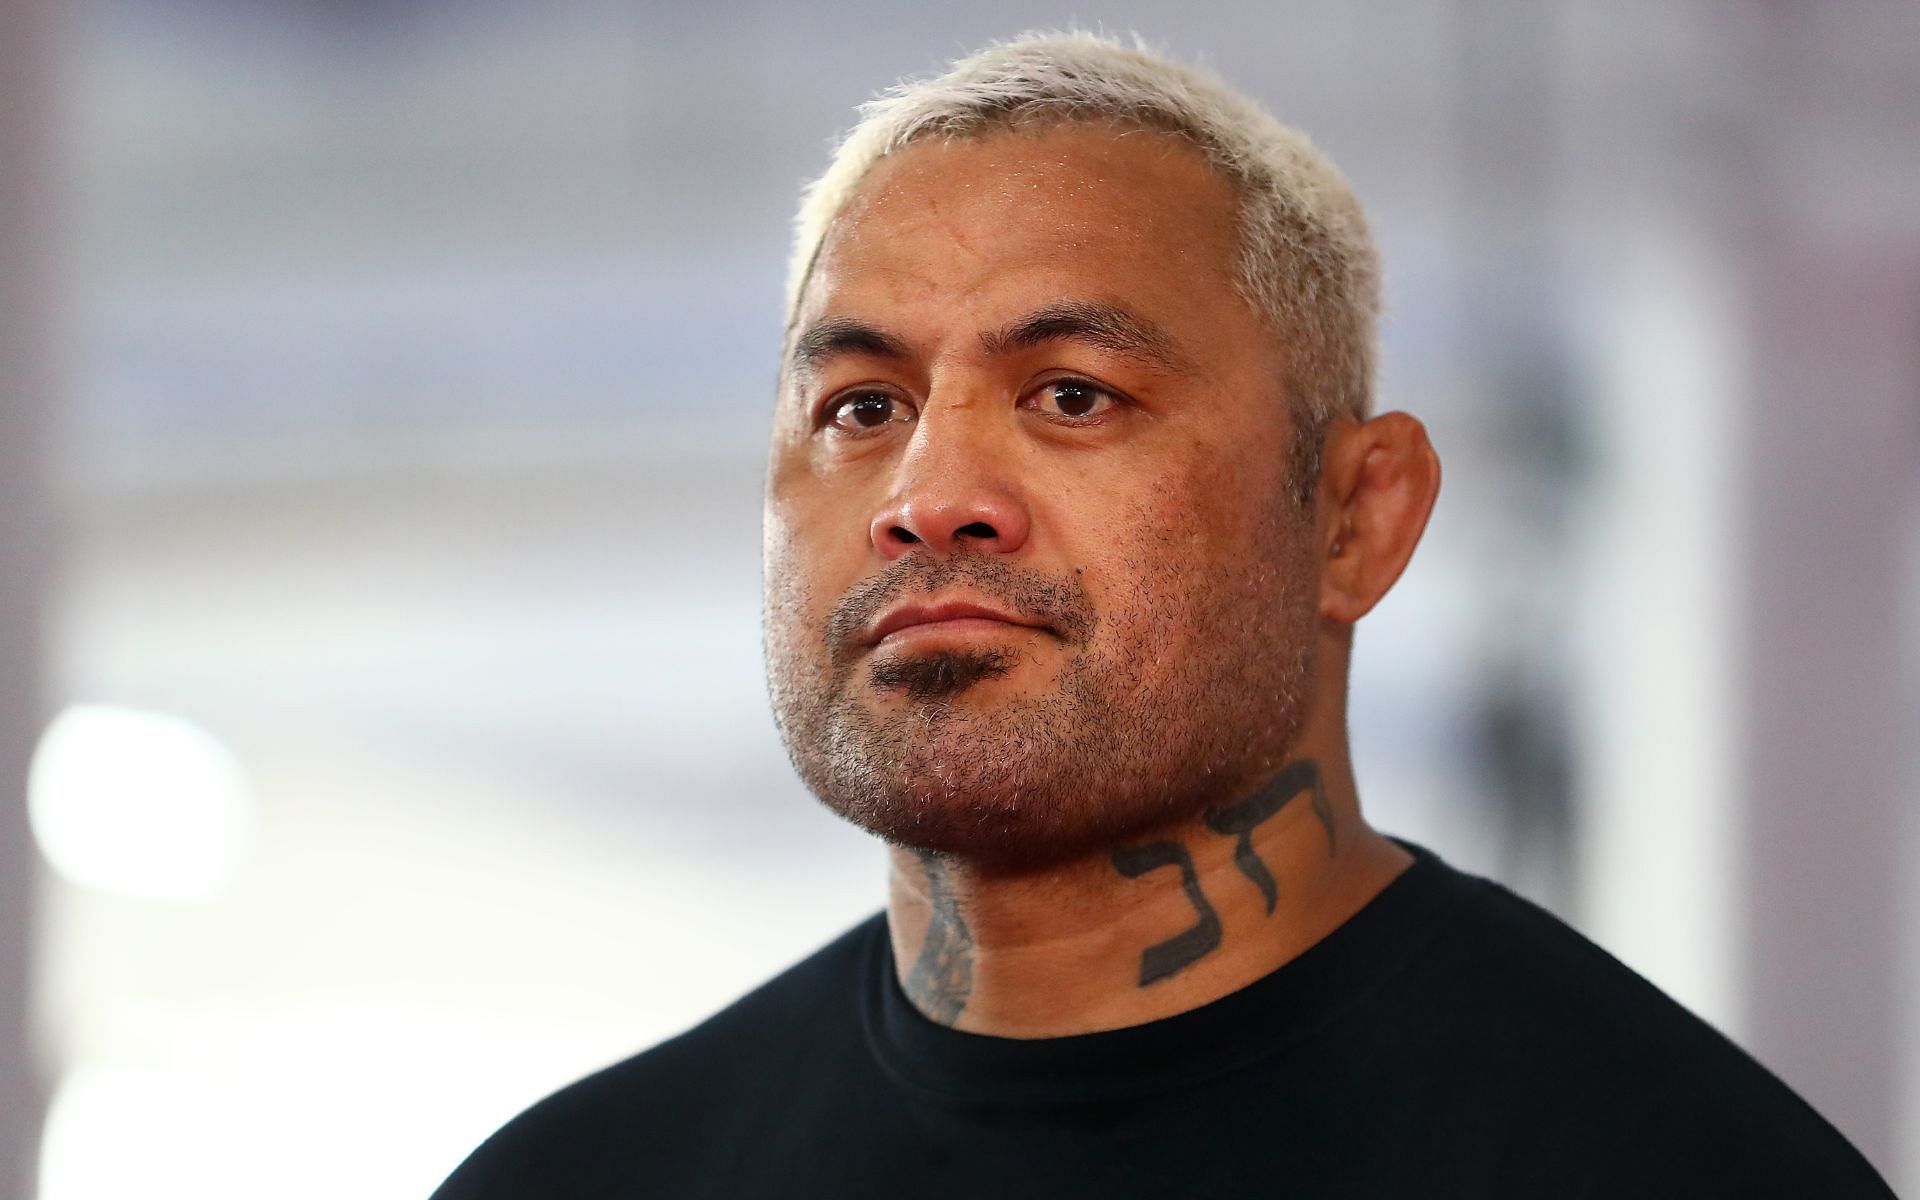 The 2001 K-1 World Grand Prix winner and MMA veteran Mark Hunt is widely-revered for his vaunted KO power, unparalleled durability, and exceptional overall striking skills